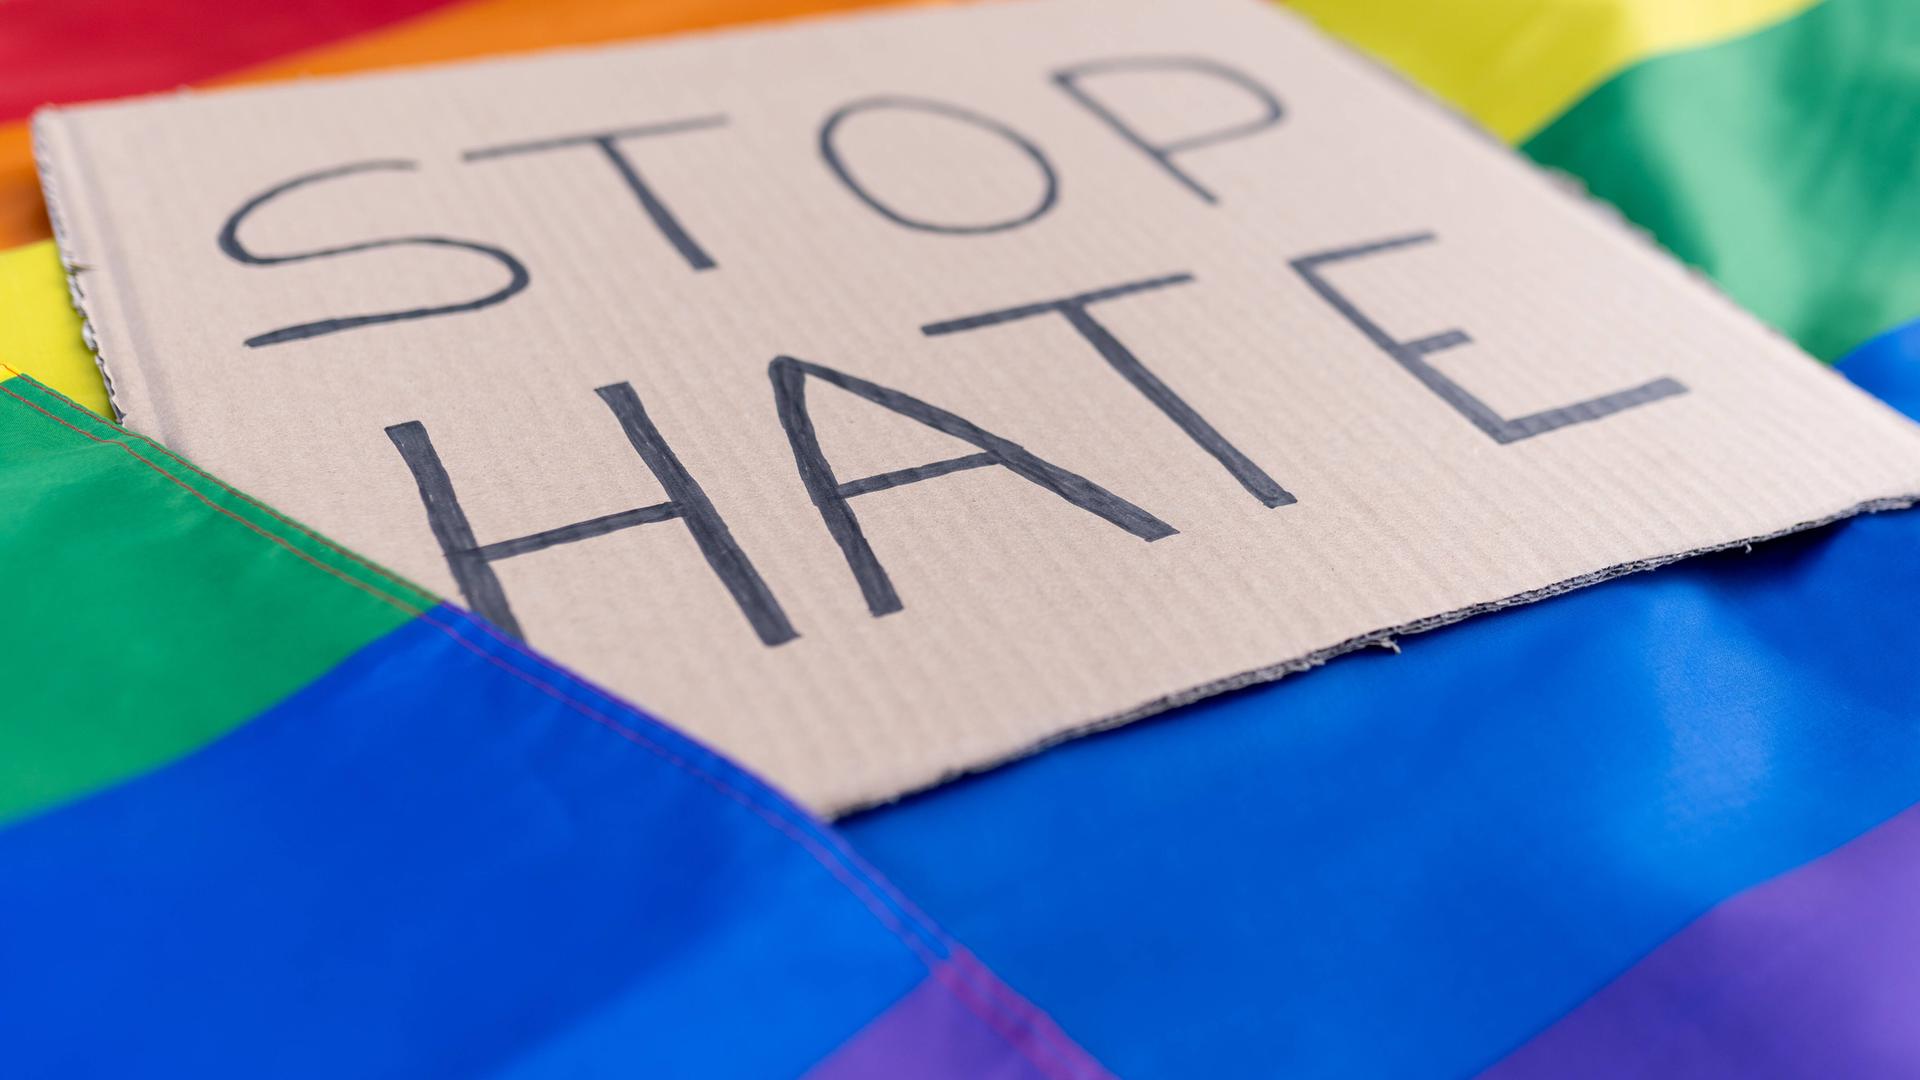 Top view full body carton with Stop Hate inscription placed on colorful rainbow LGBT flag on light street in city Miguel